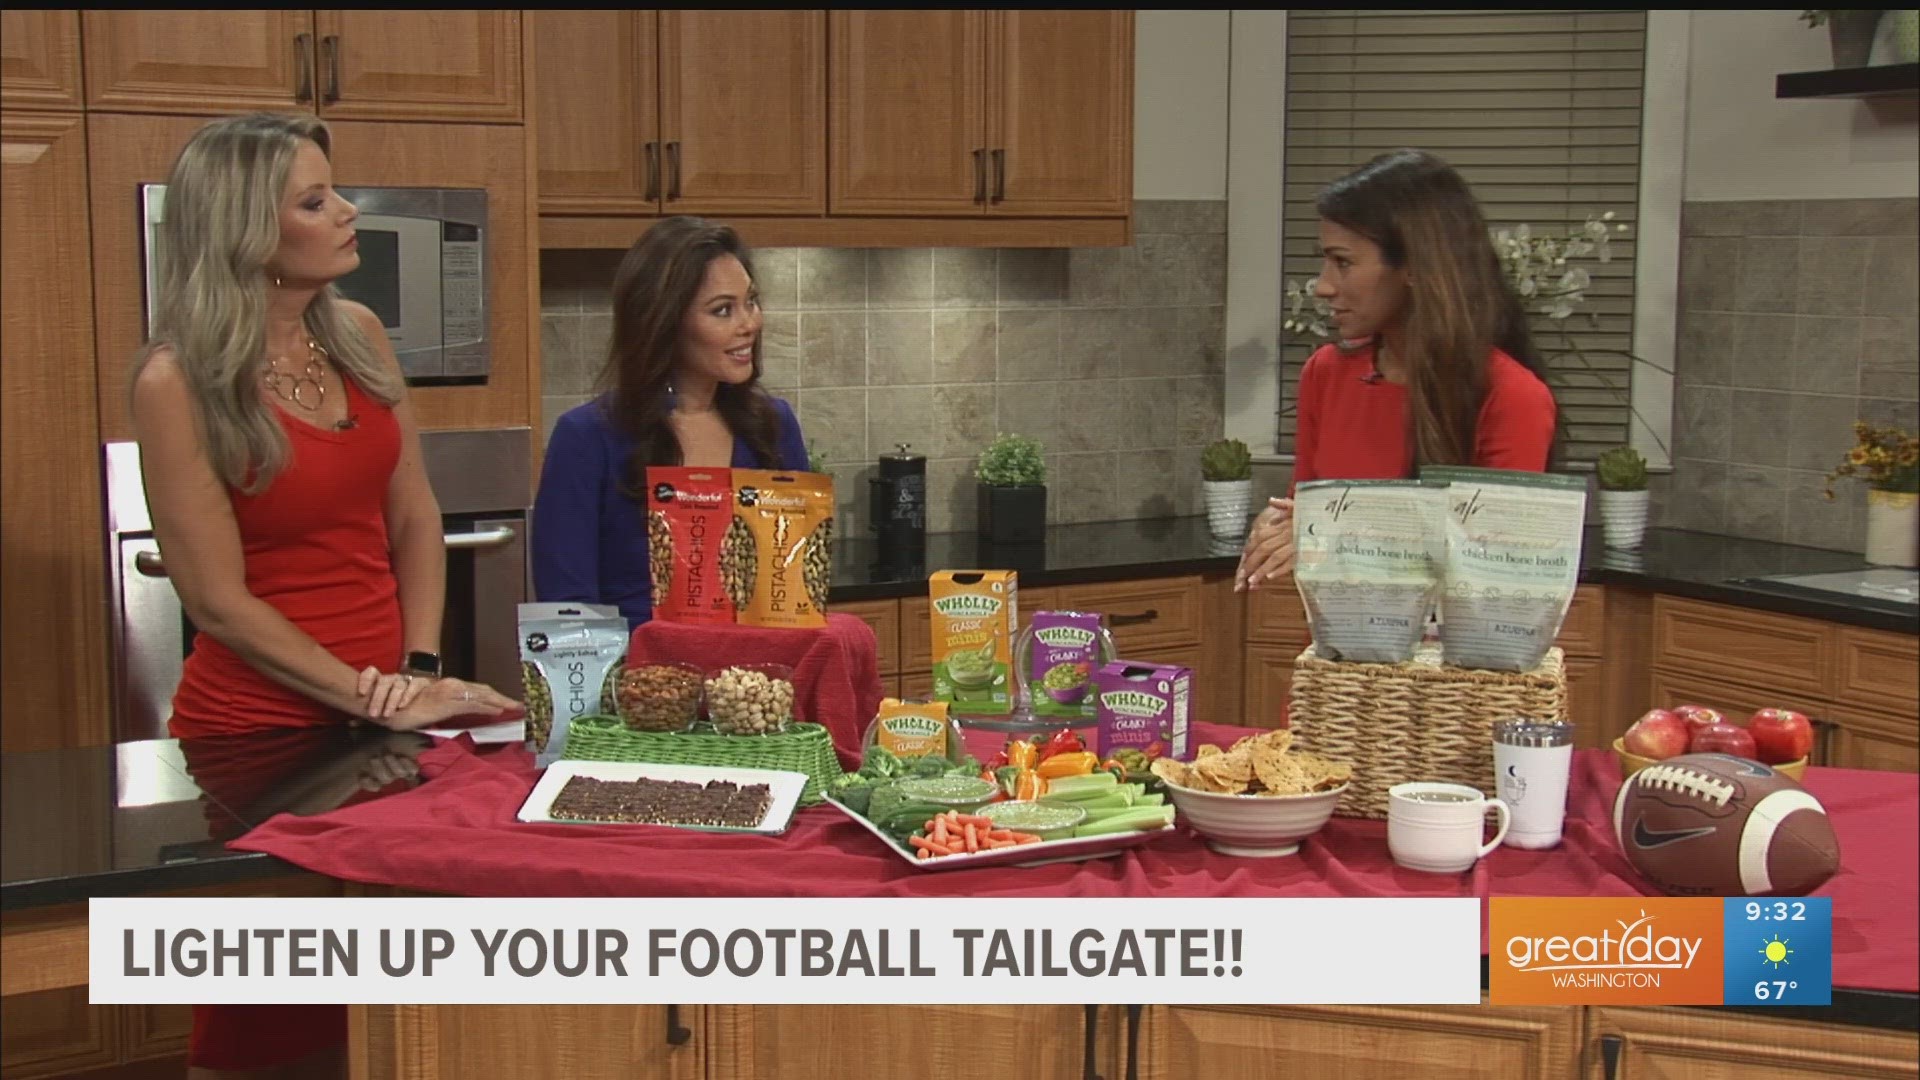 Looking for some game day options that won't pack on the pounds? Registered Dietitian Roxana Ehsani has a few suggestions to lighten up your tailgate cuisine.